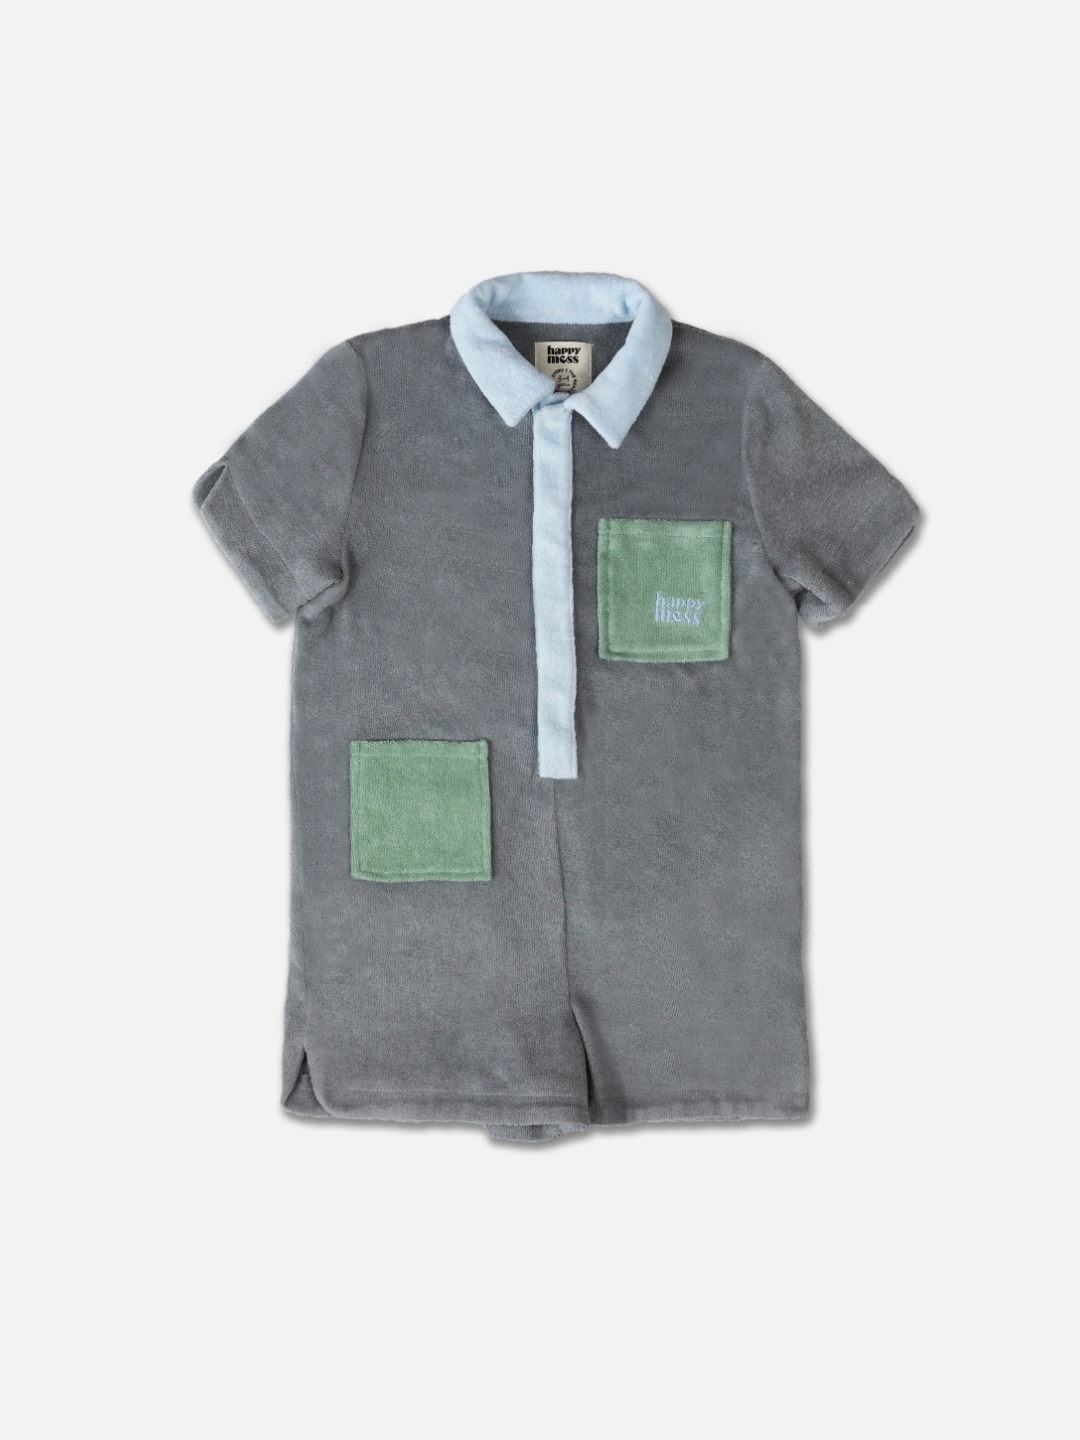 Stone | A kids' jumpsuit in pale gray with blue collar and placket, and two green pockets